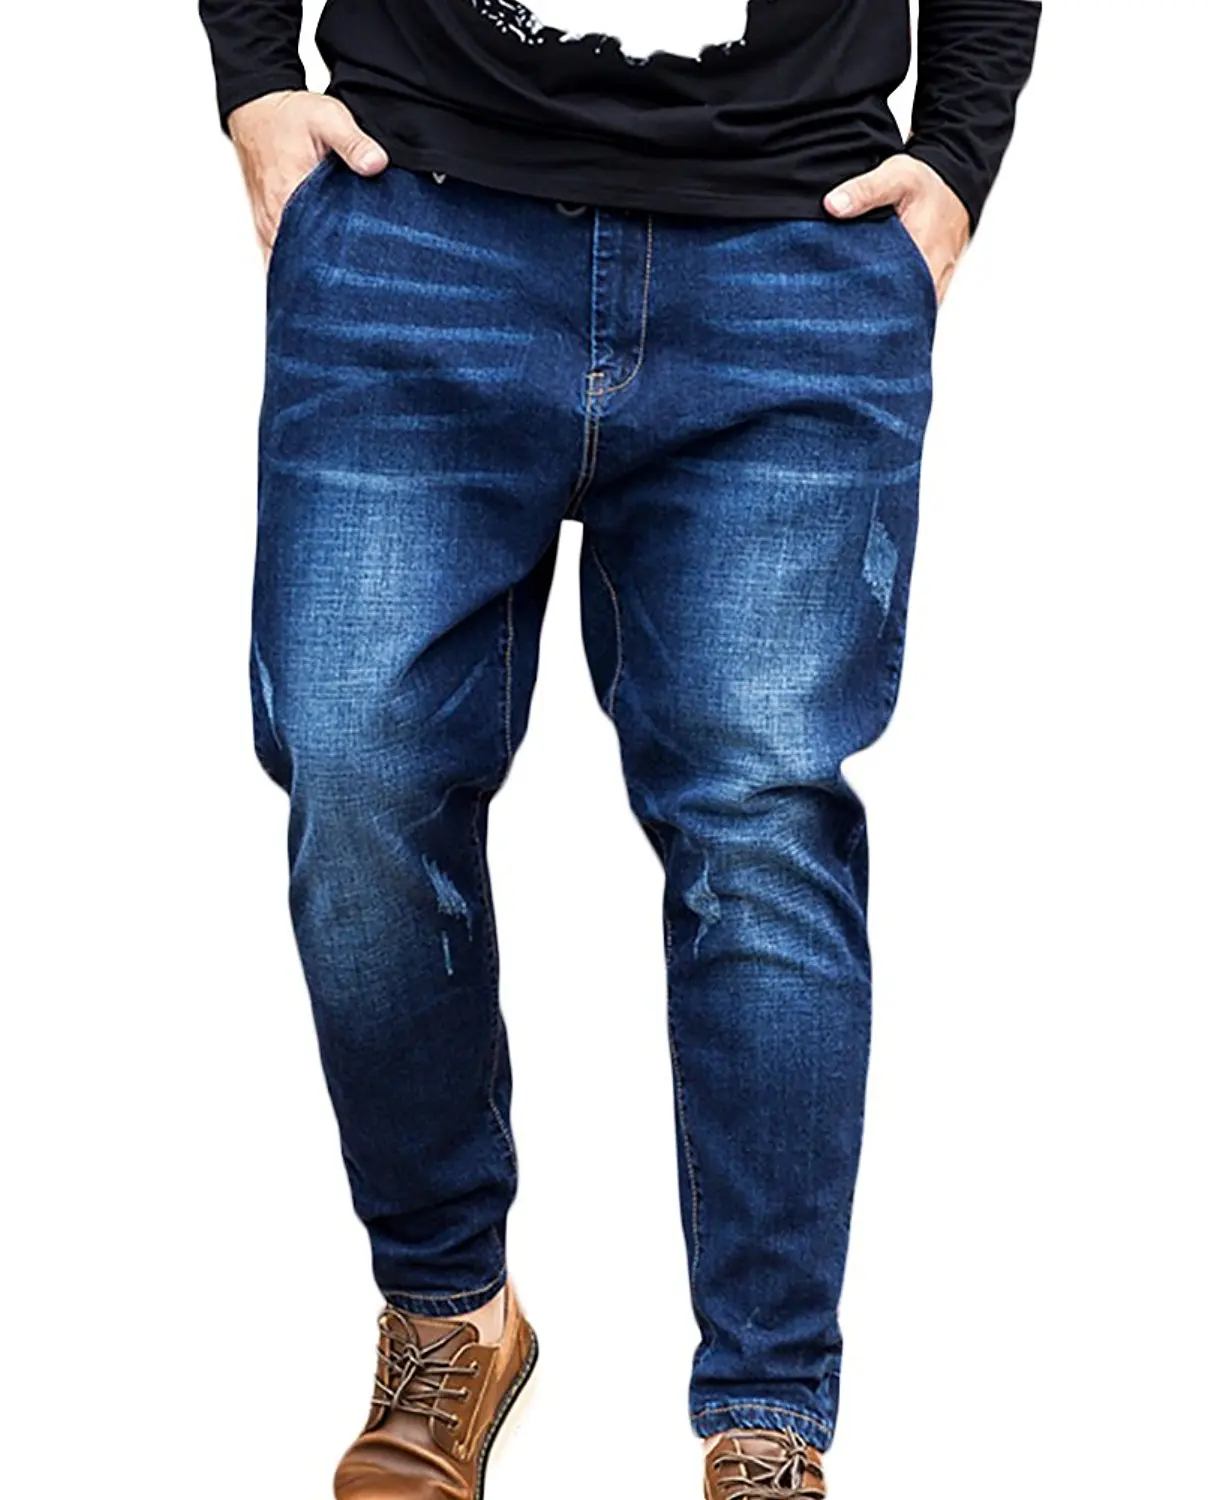 Cheap Open Crotch Jeans, find Open Crotch Jeans deals on line at ...